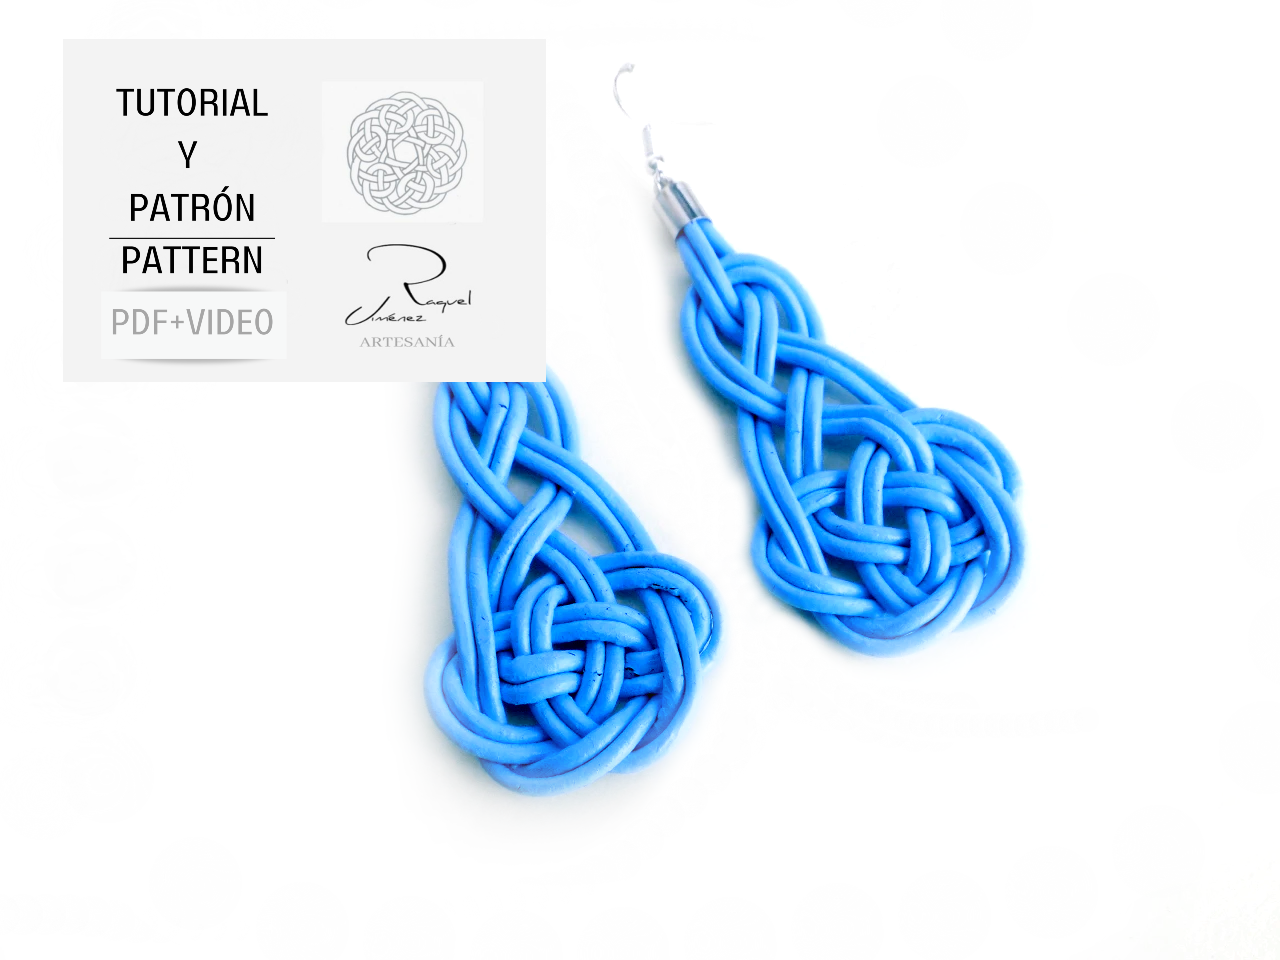 Tutorial to make macramé earrings with pattern